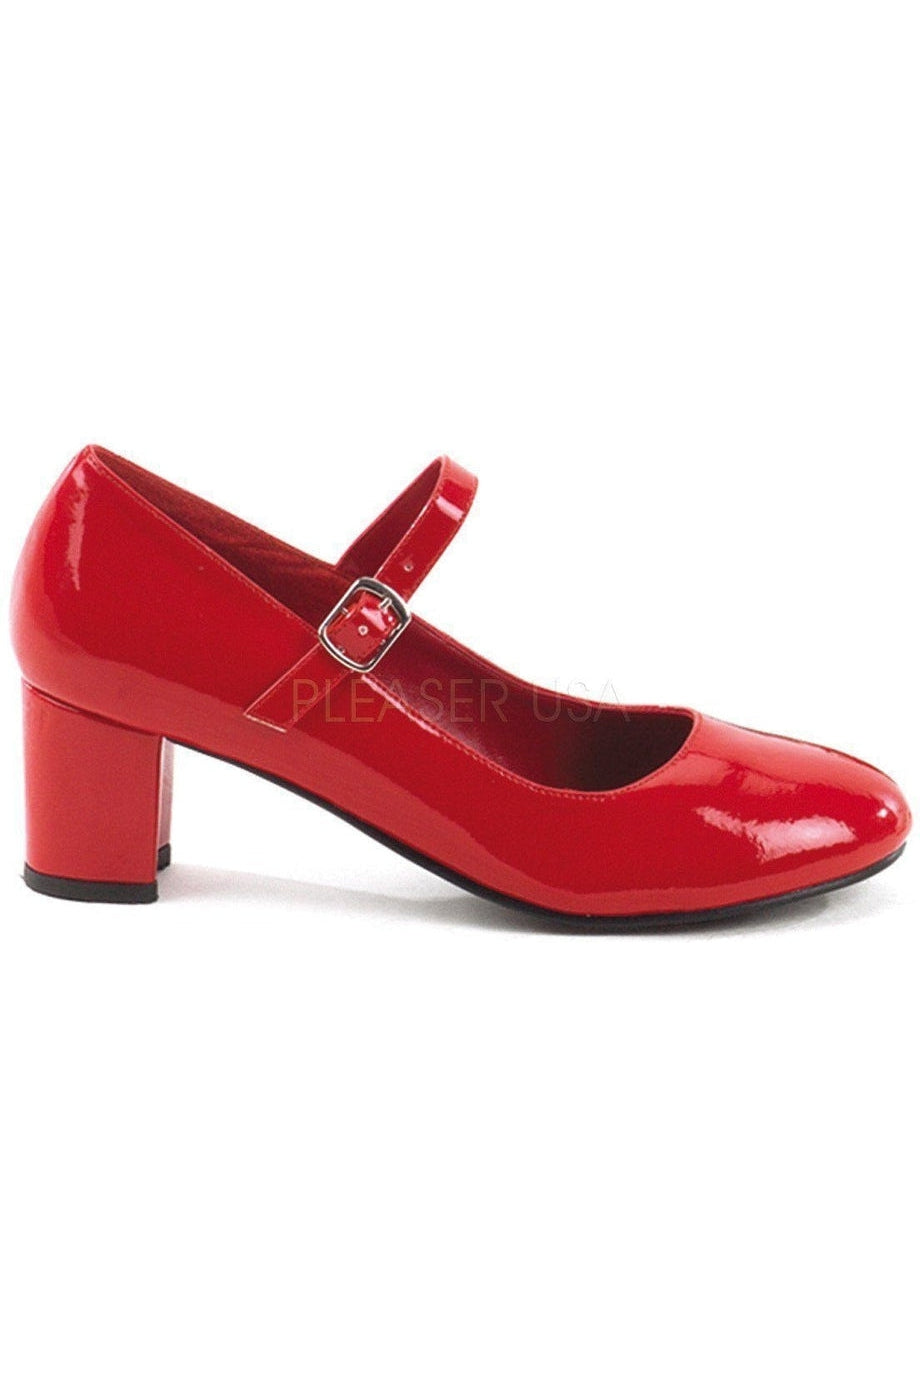 red patent school shoes